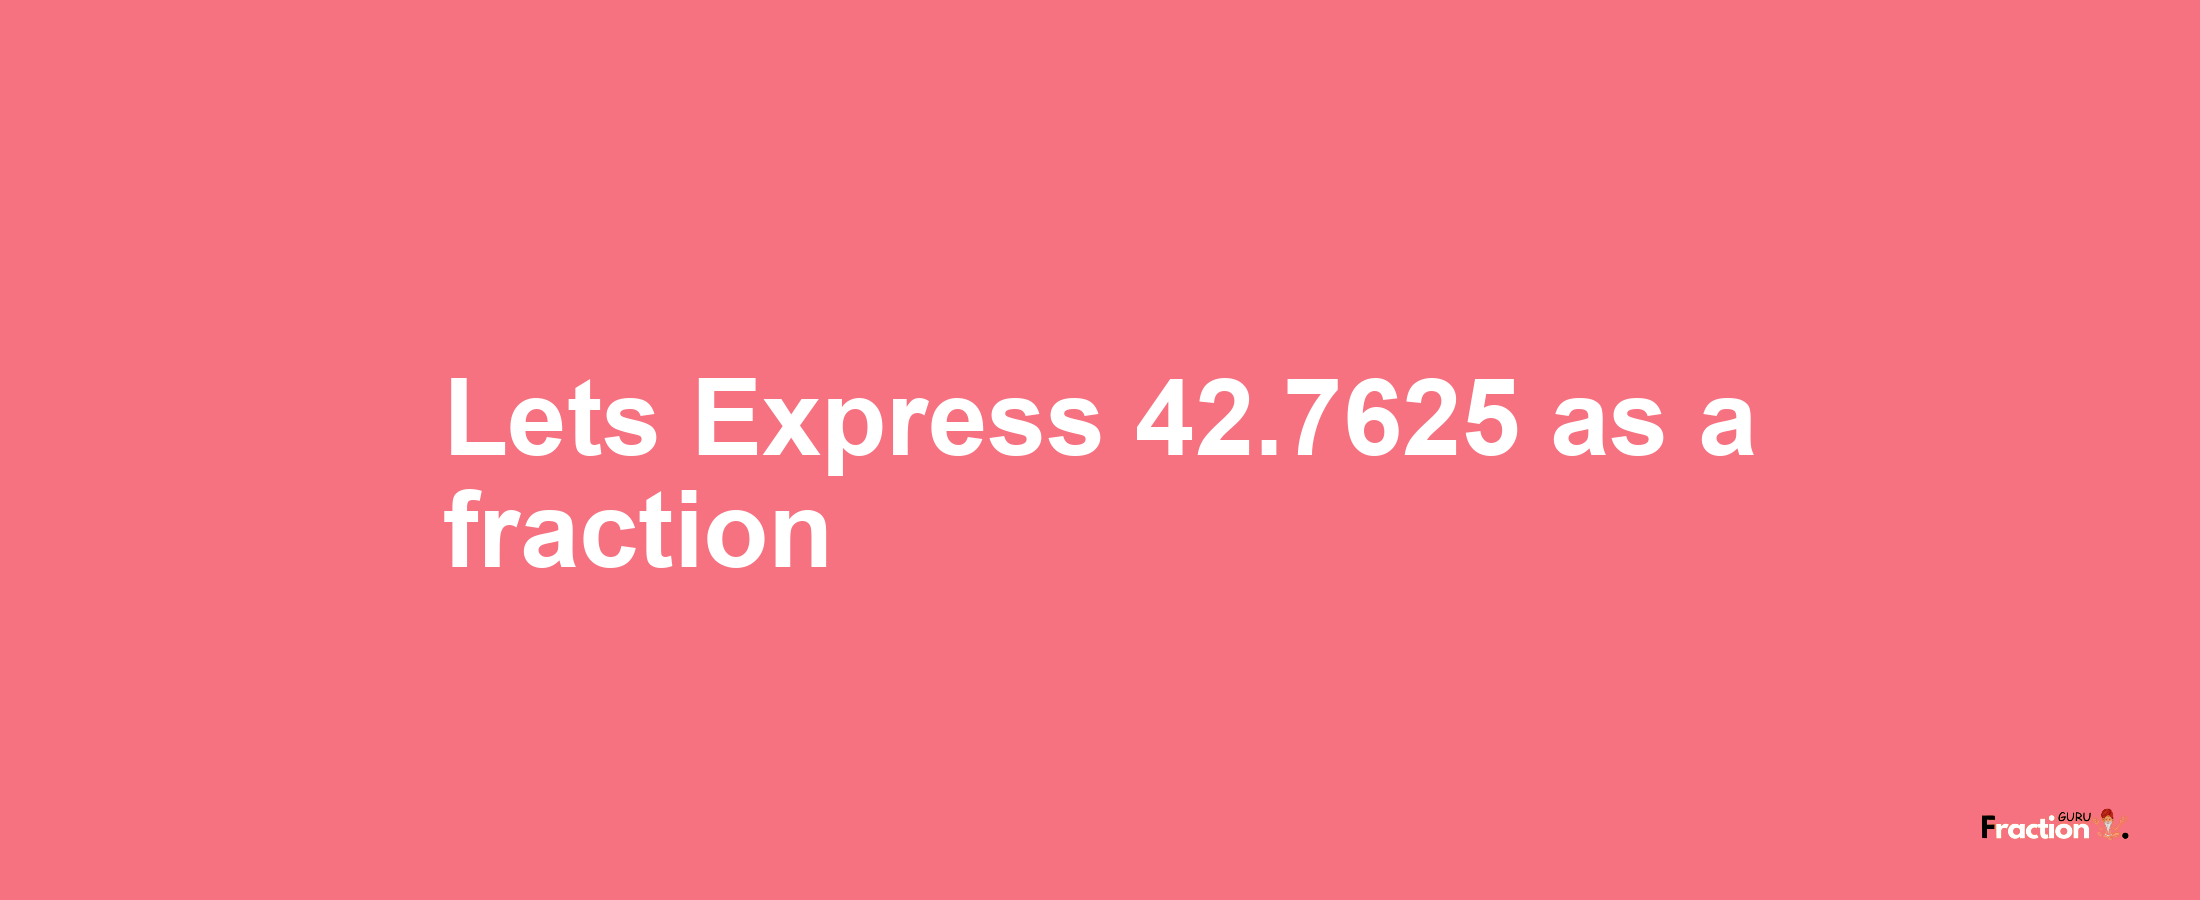 Lets Express 42.7625 as afraction